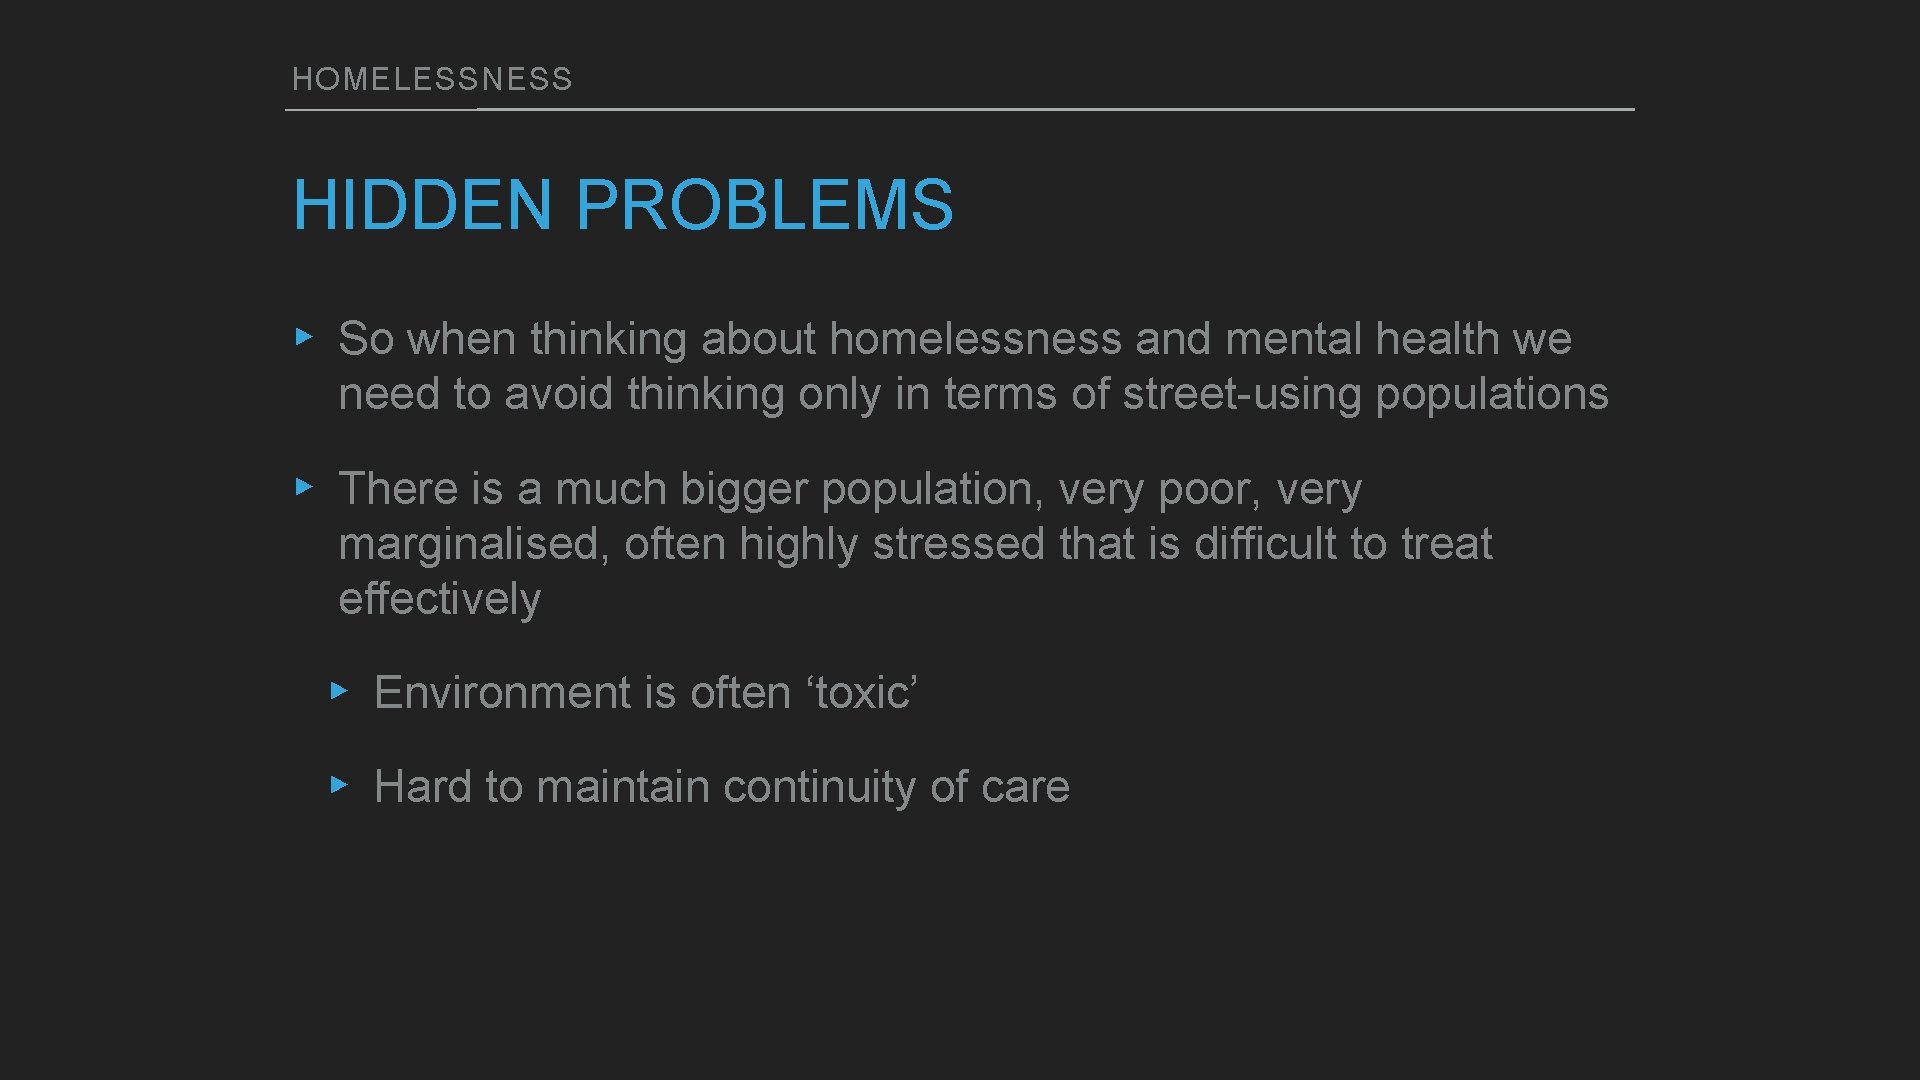 HOMELESSNESS HIDDEN PROBLEMS ▸ So when thinking about homelessness and mental health we need